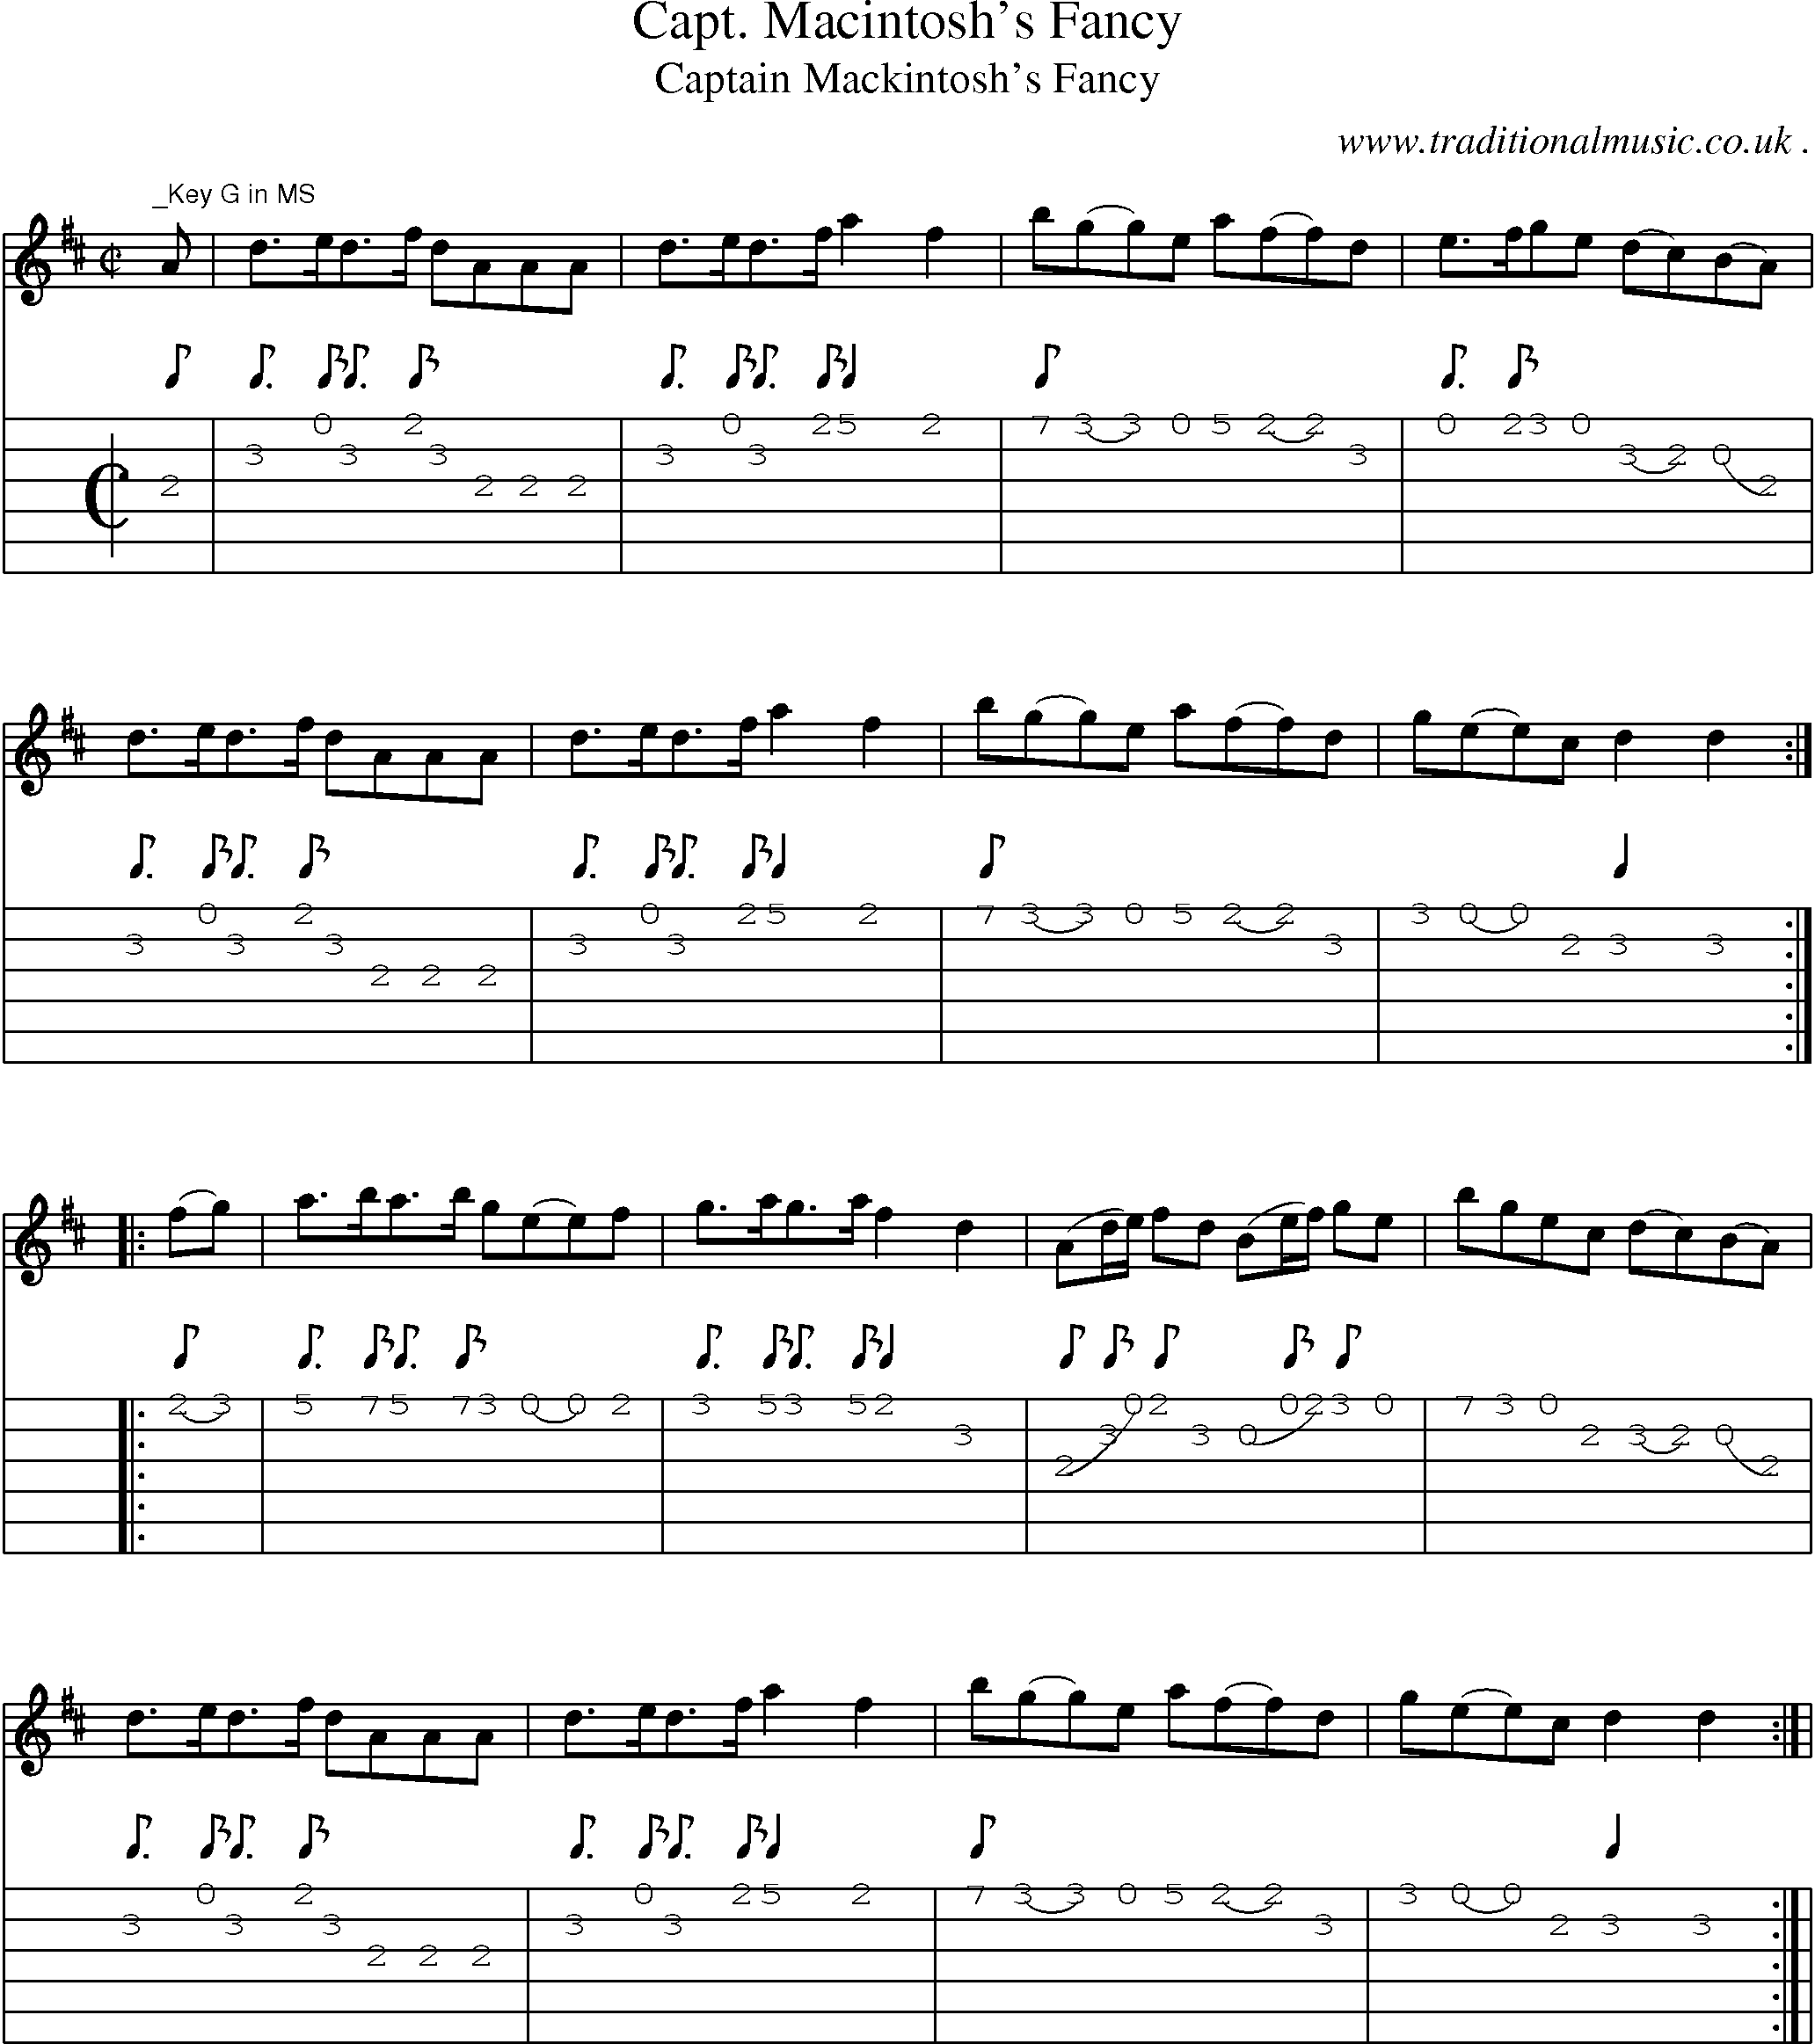 Sheet-Music and Guitar Tabs for Capt Macintoshs Fancy